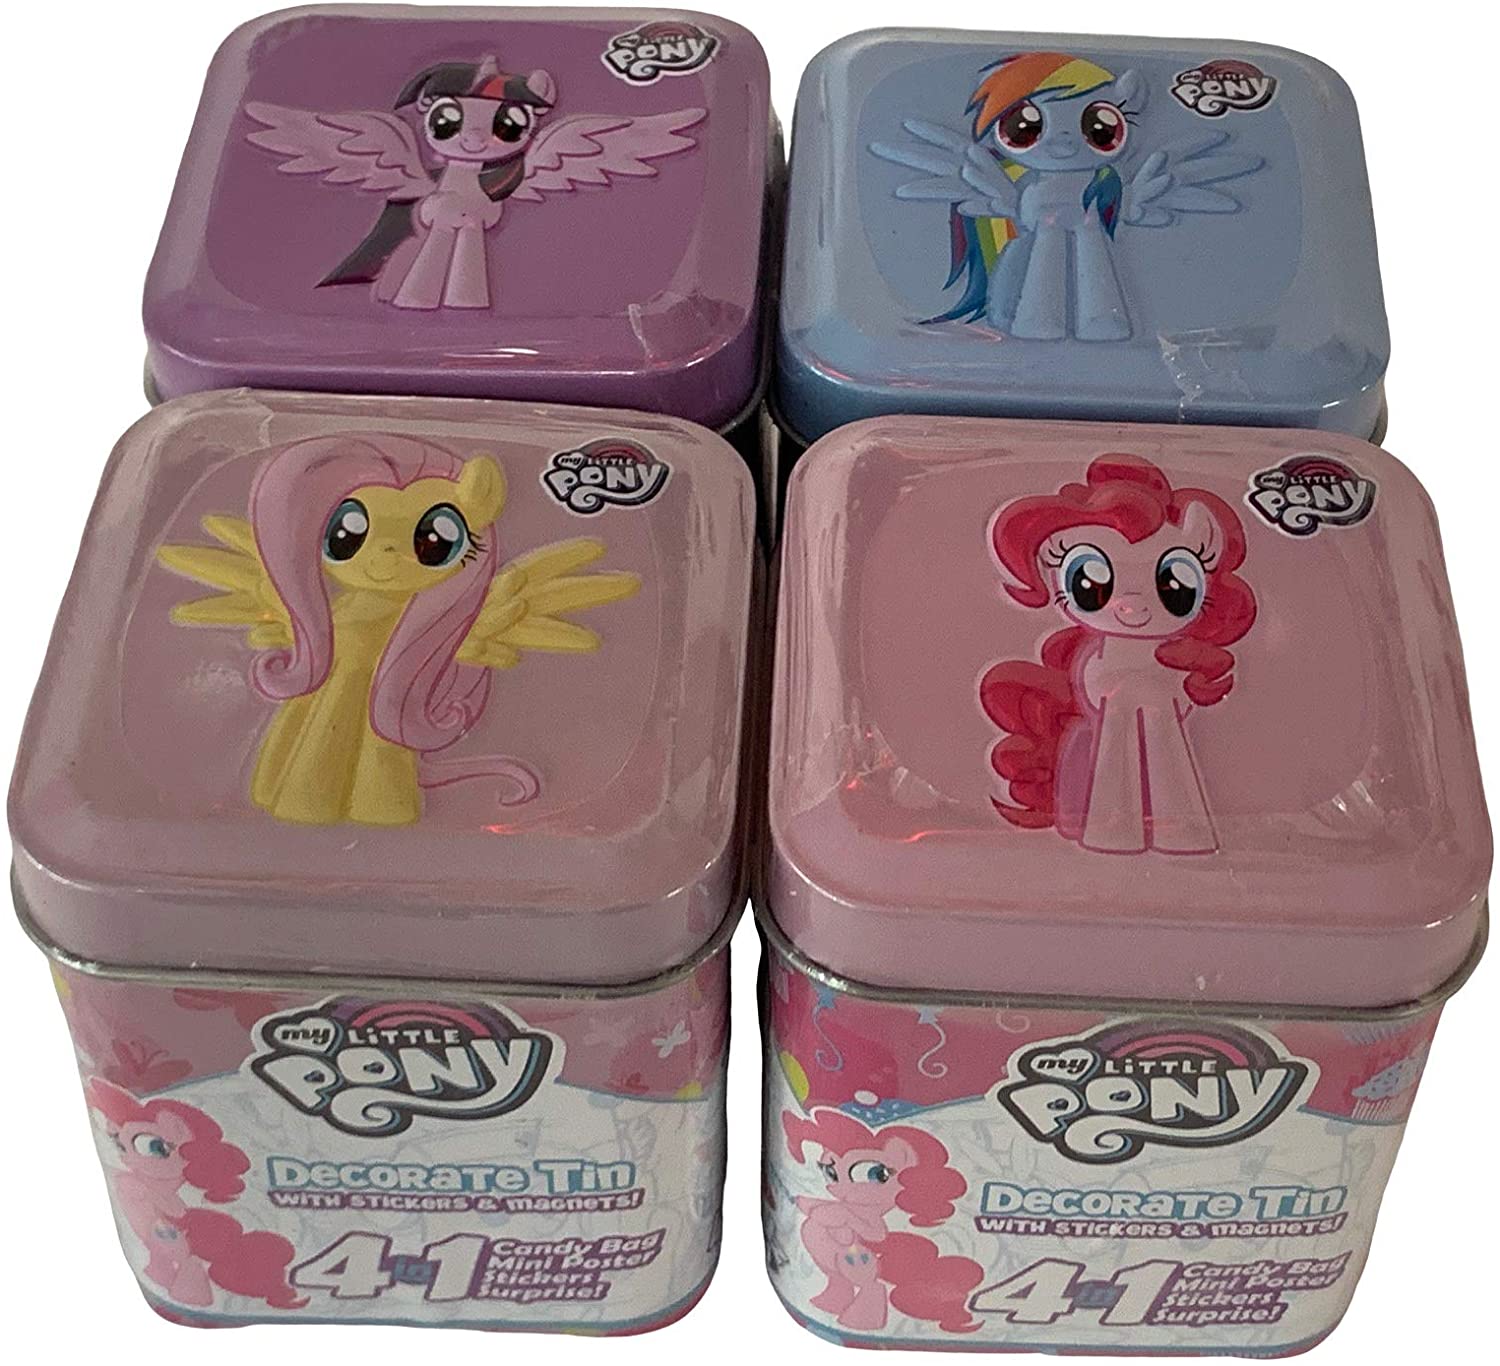 MLP Stickers and Magnets 4 in 1 Deluxe Collector Bundle